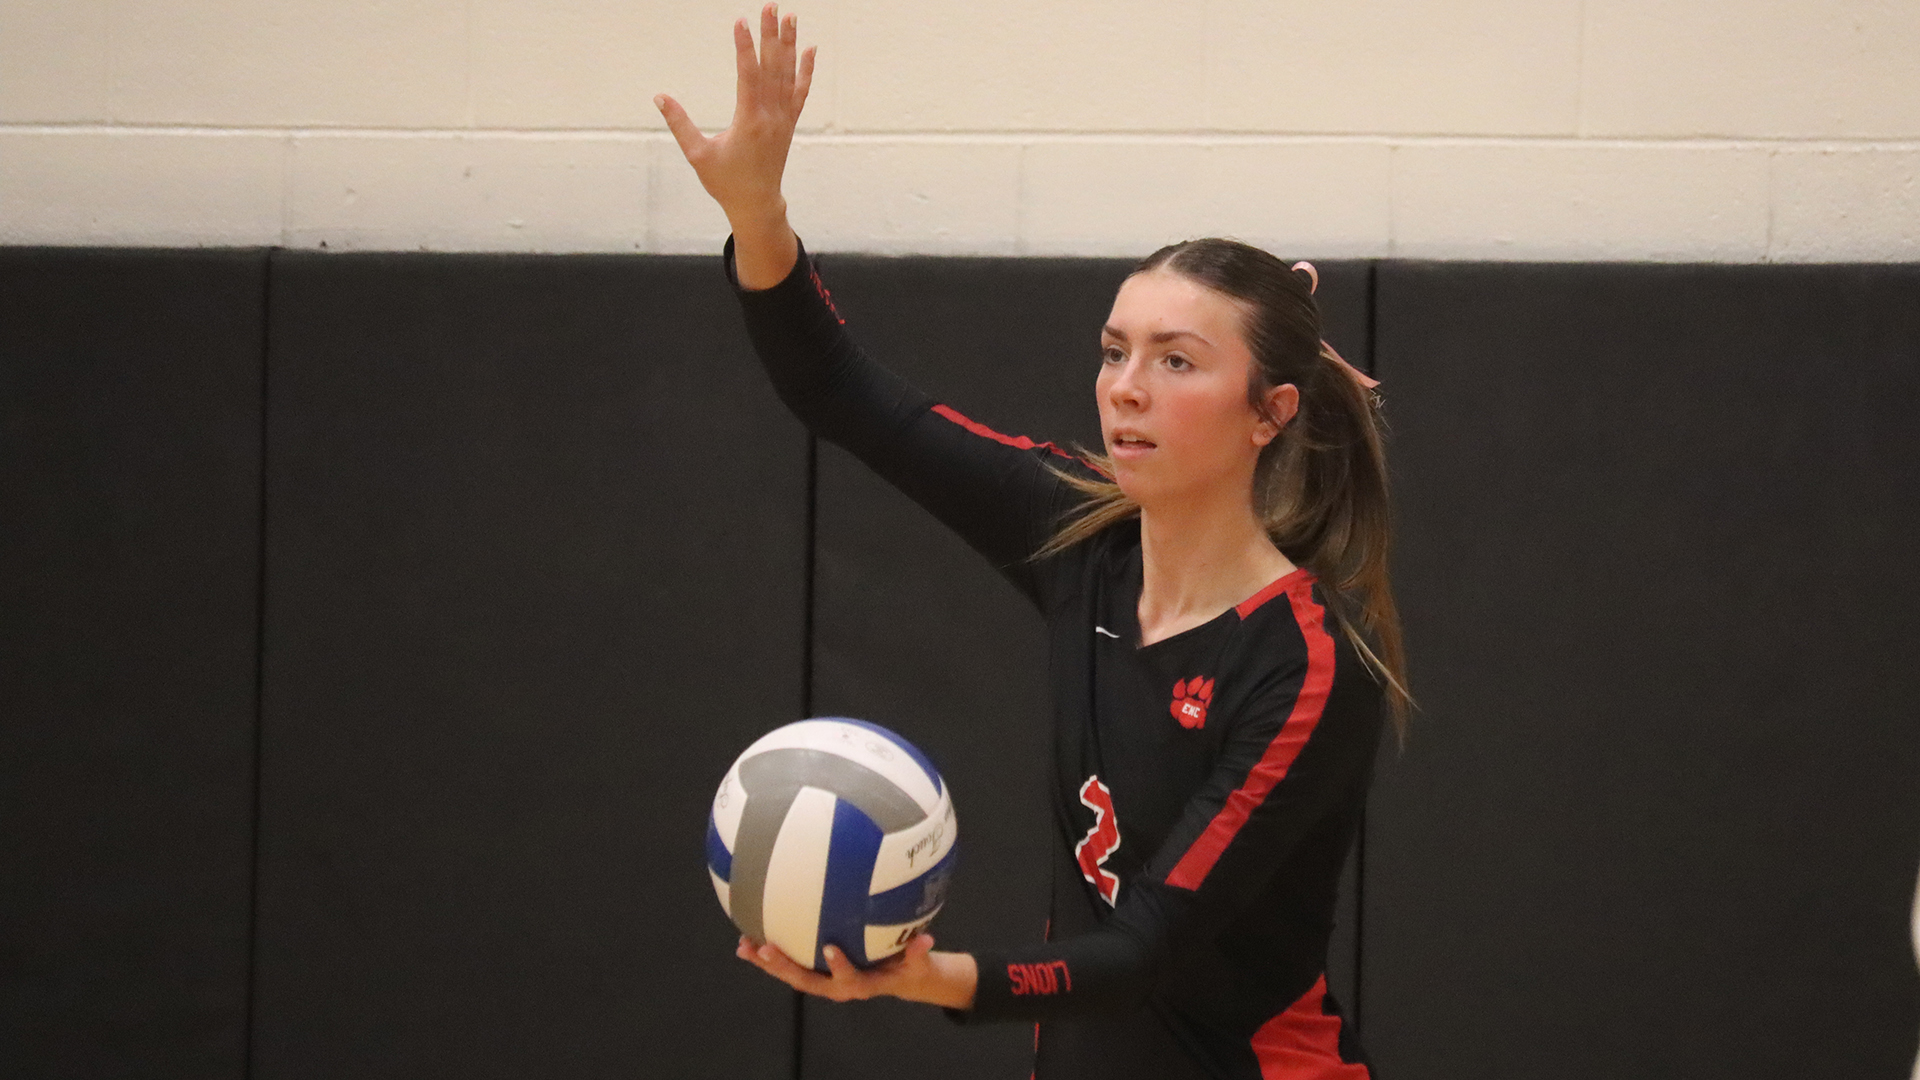 Women’s Volleyball Earns 3-0 Win Over Elms Wednesday Night